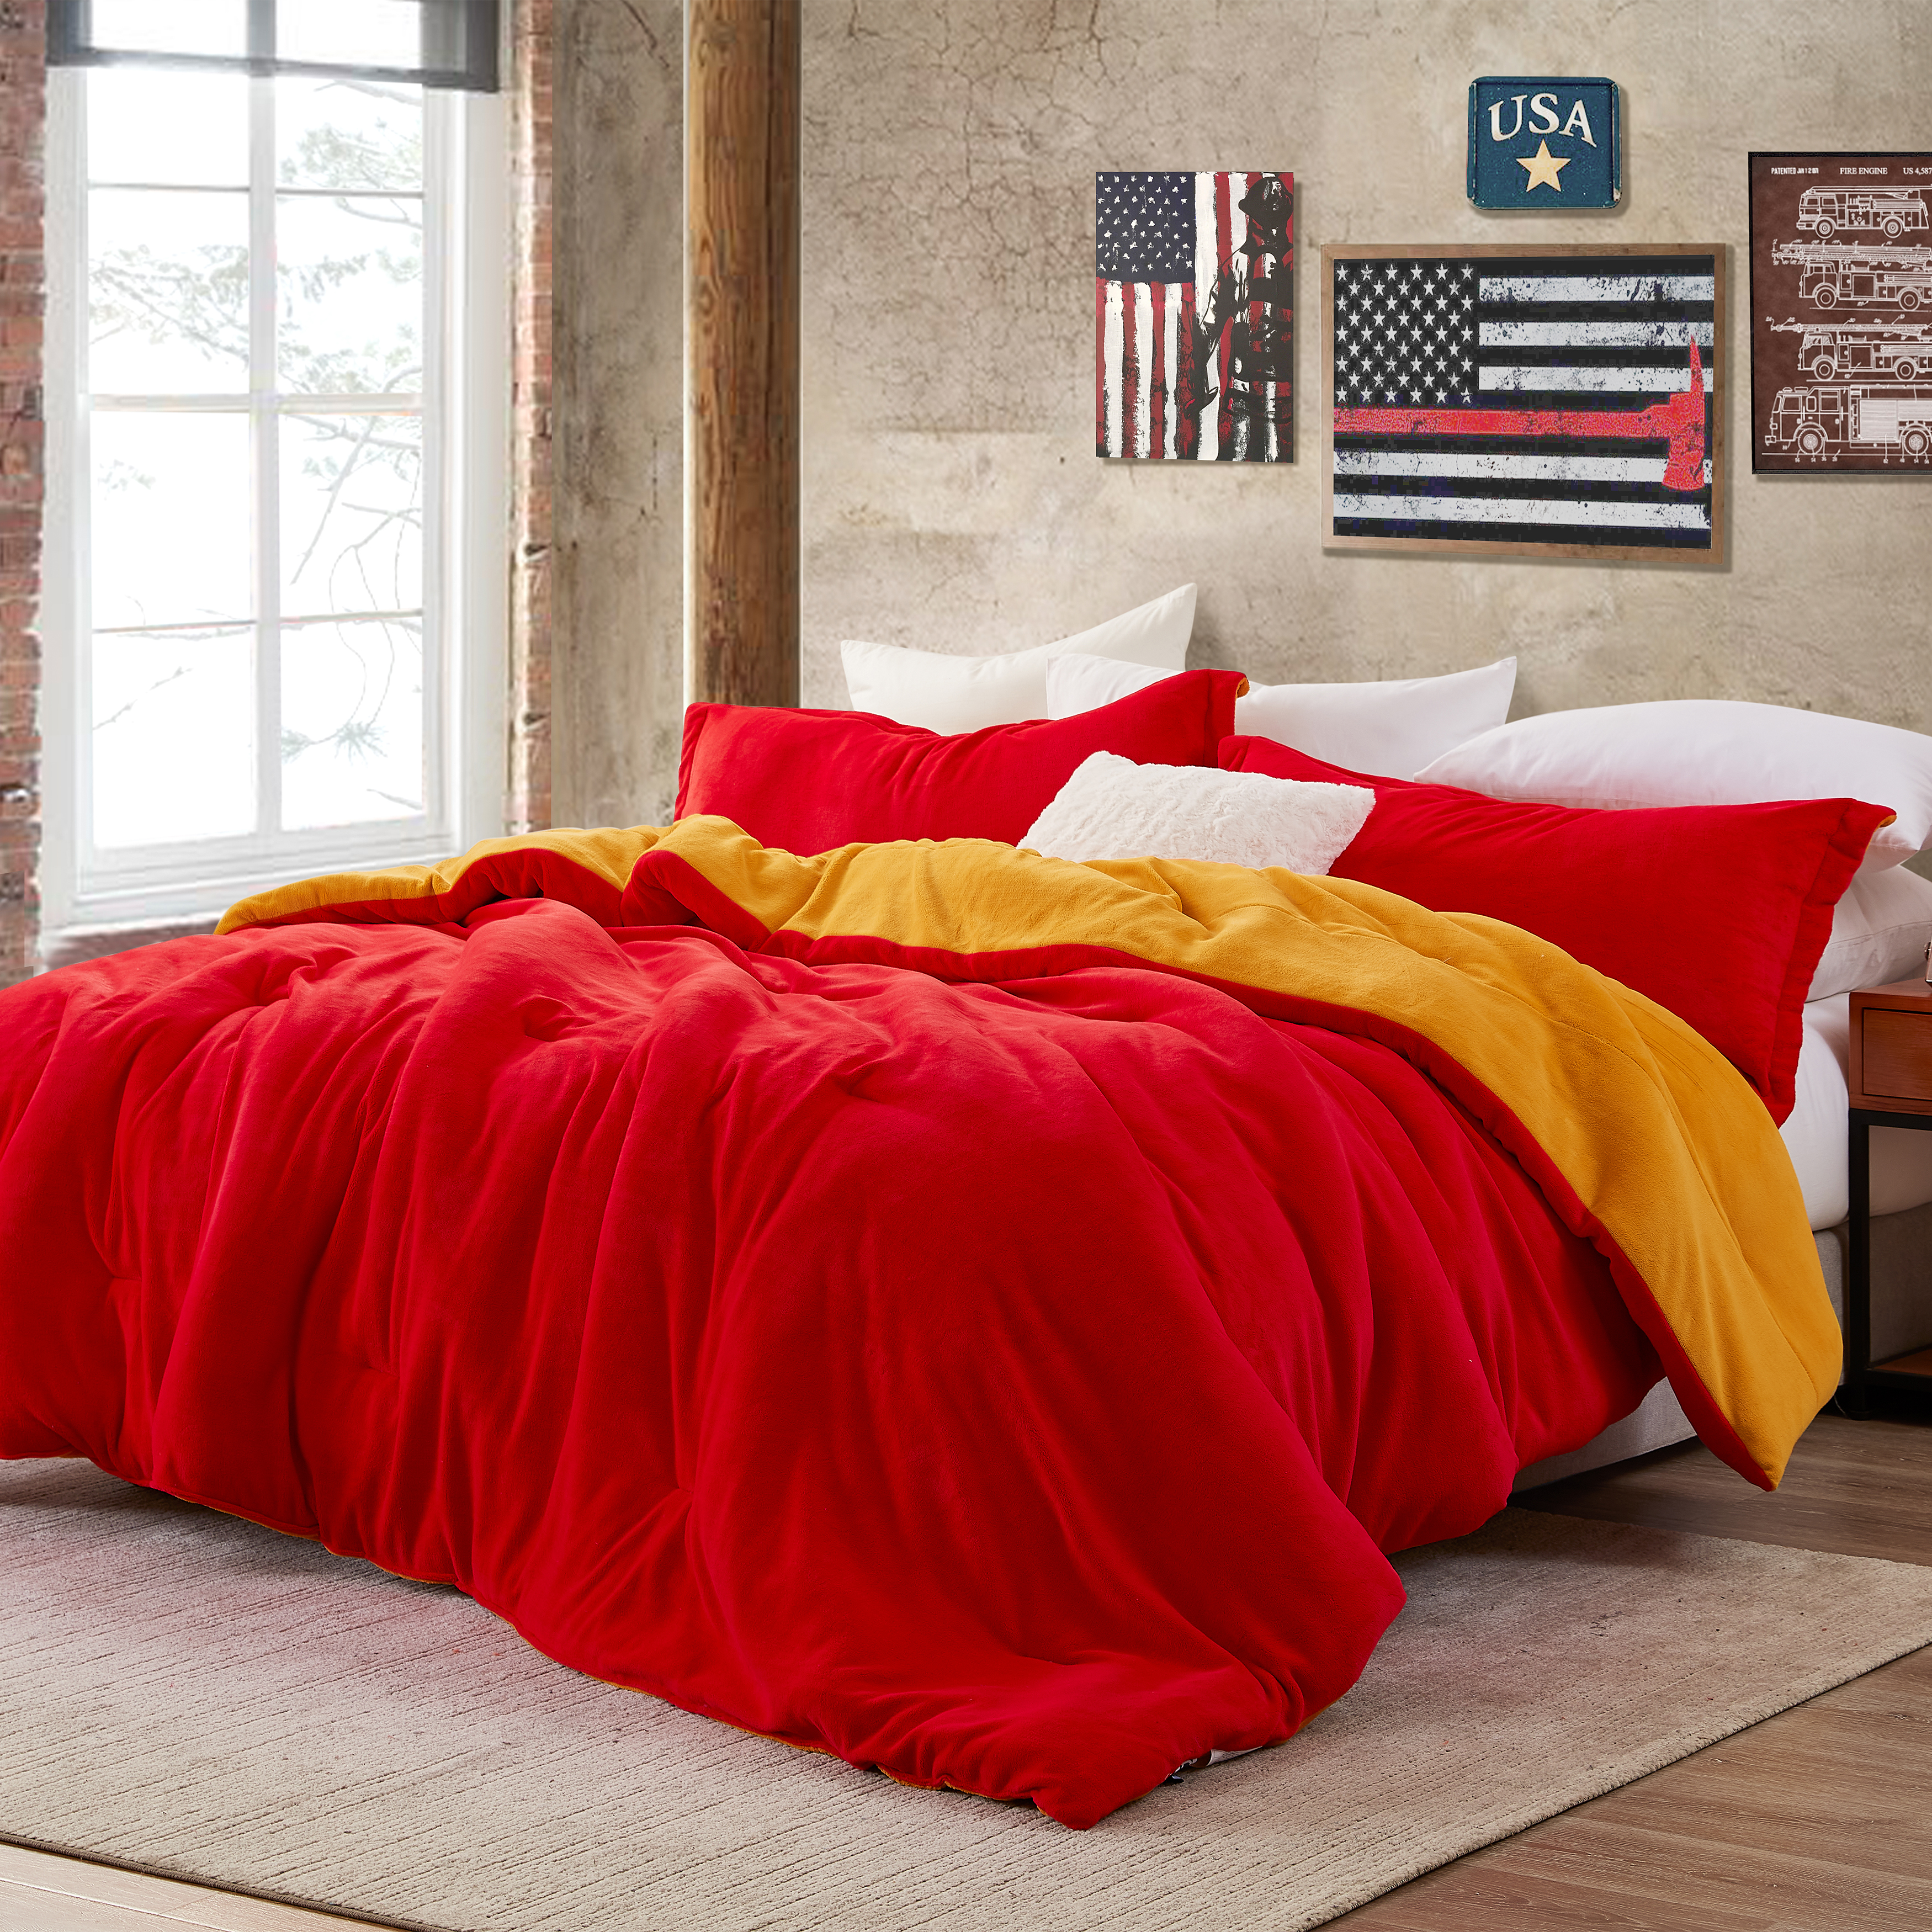 Vibrant Twin Extra Large Bedding Decor Trendy Red and Orange Reversible Twin XL Comforter Set